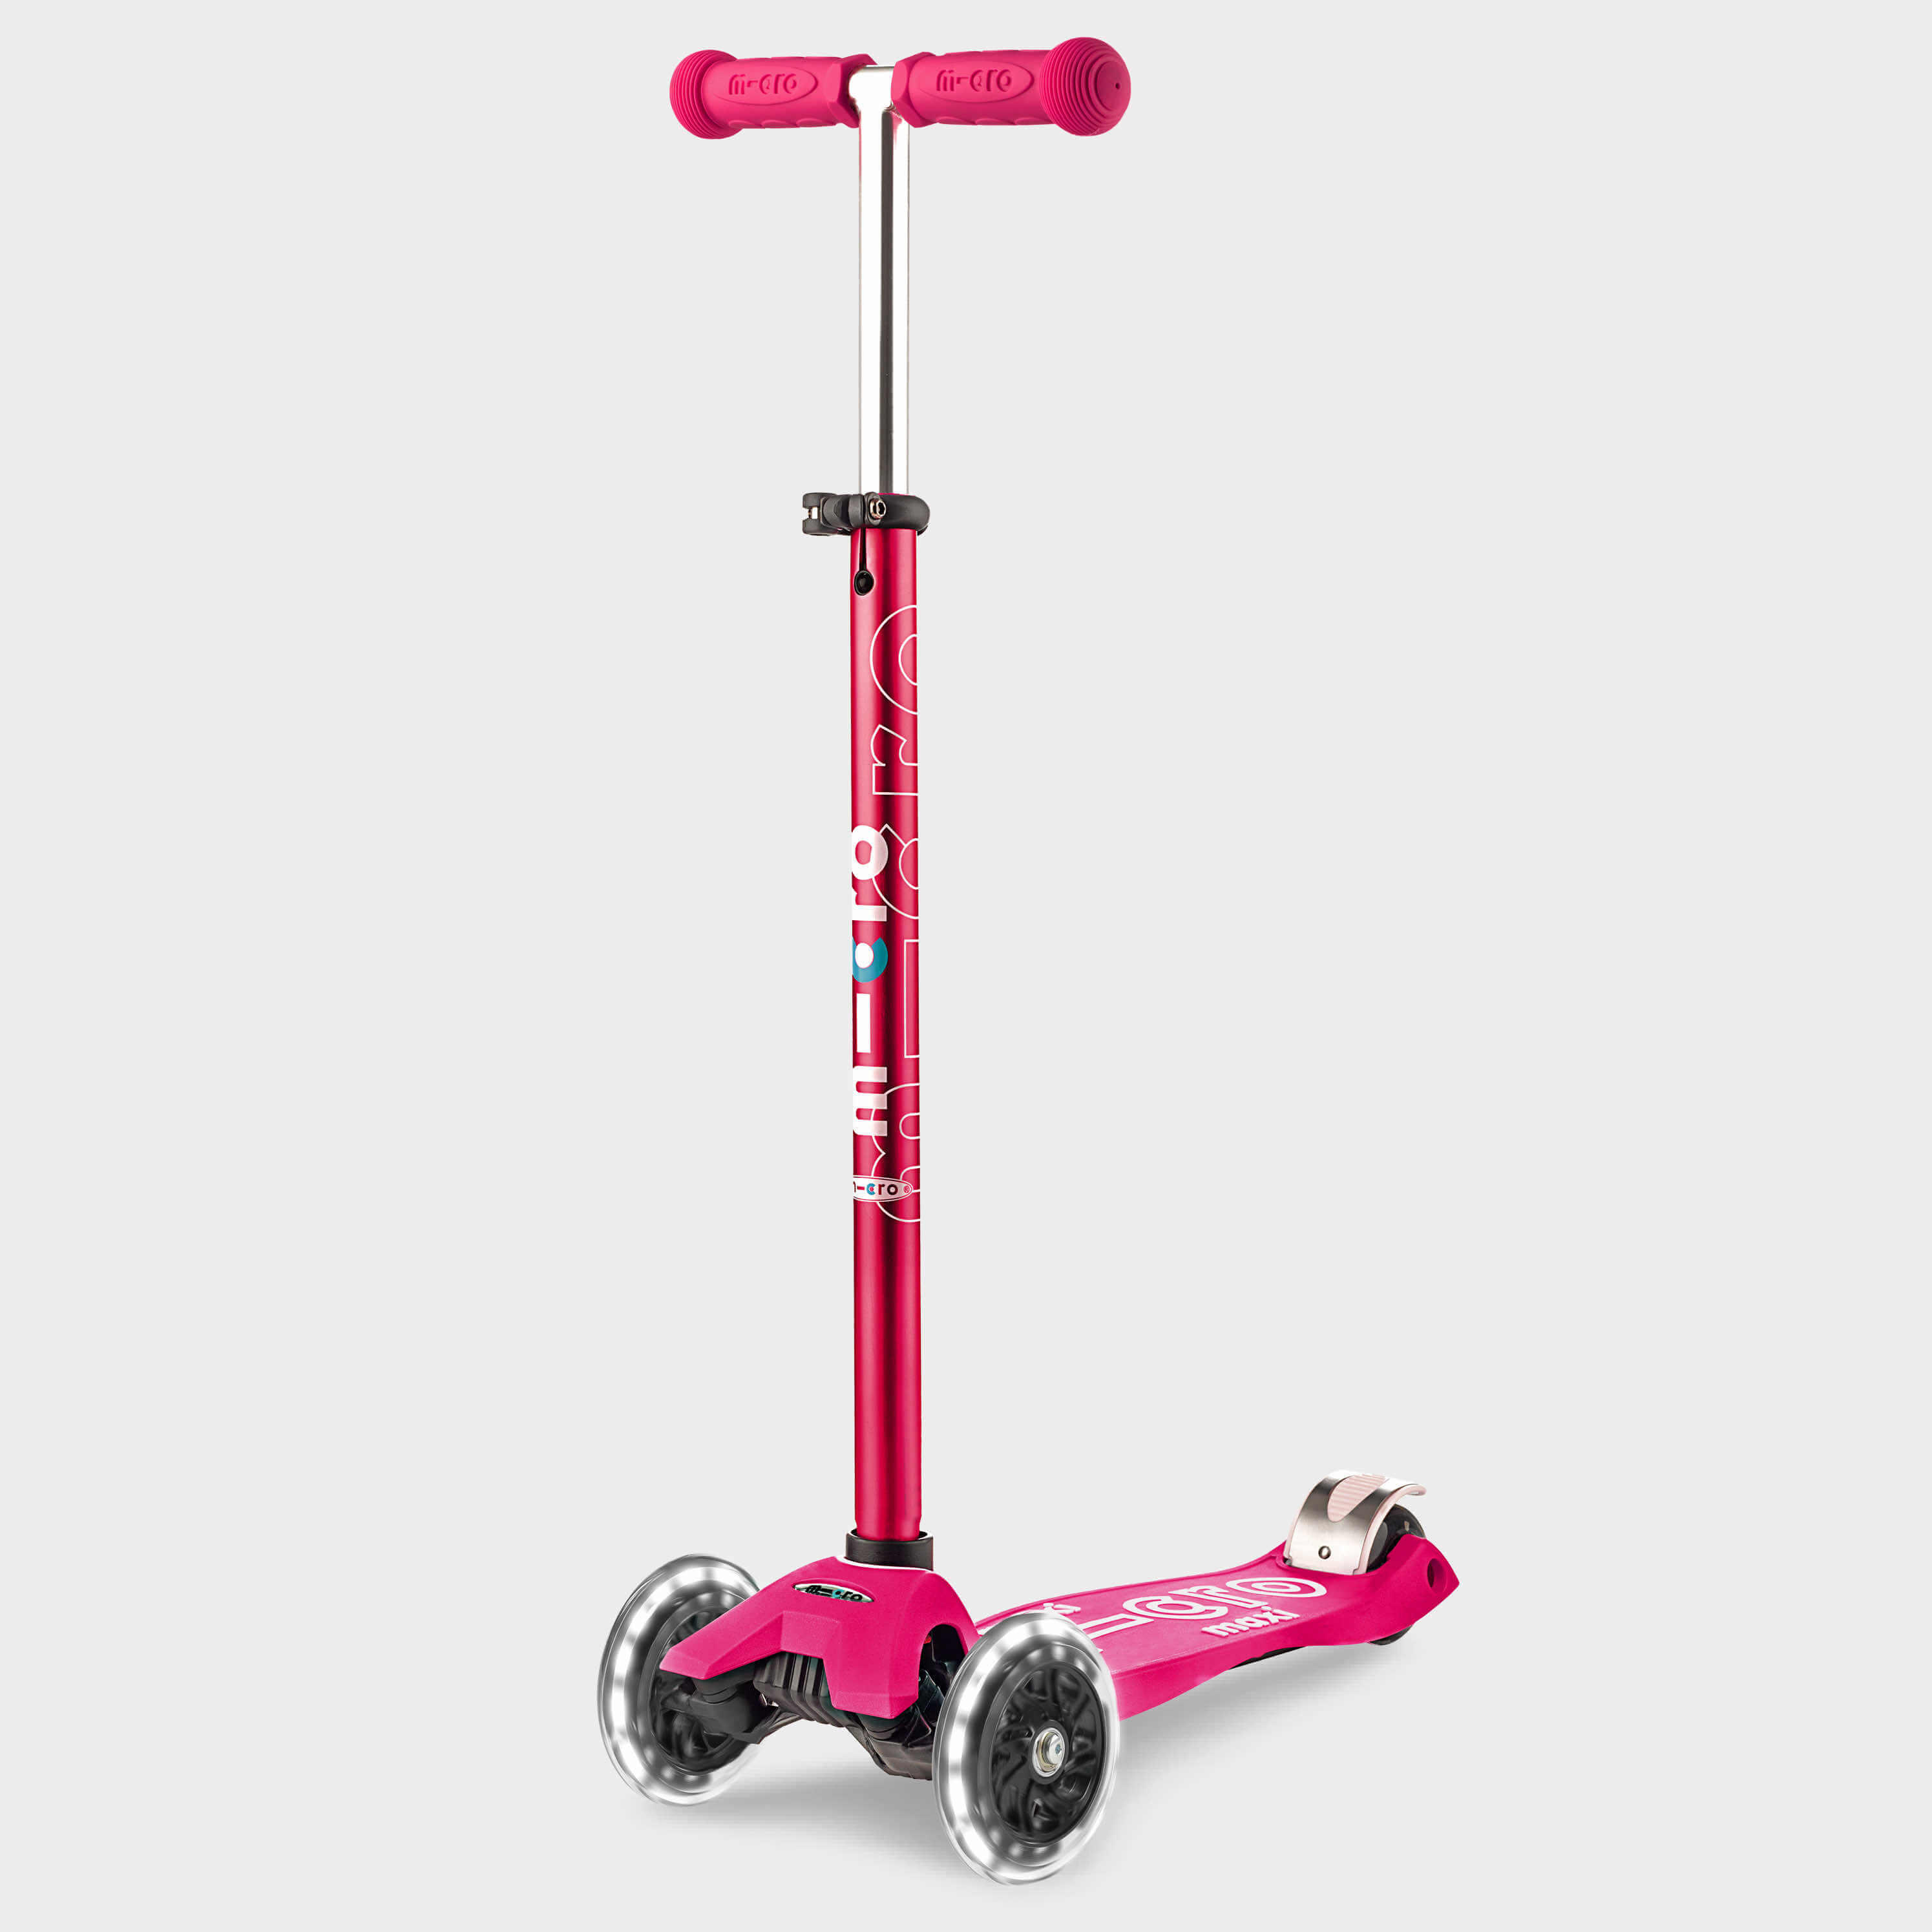 MICRO Maxi Scooter - Light up Wheels: Pink